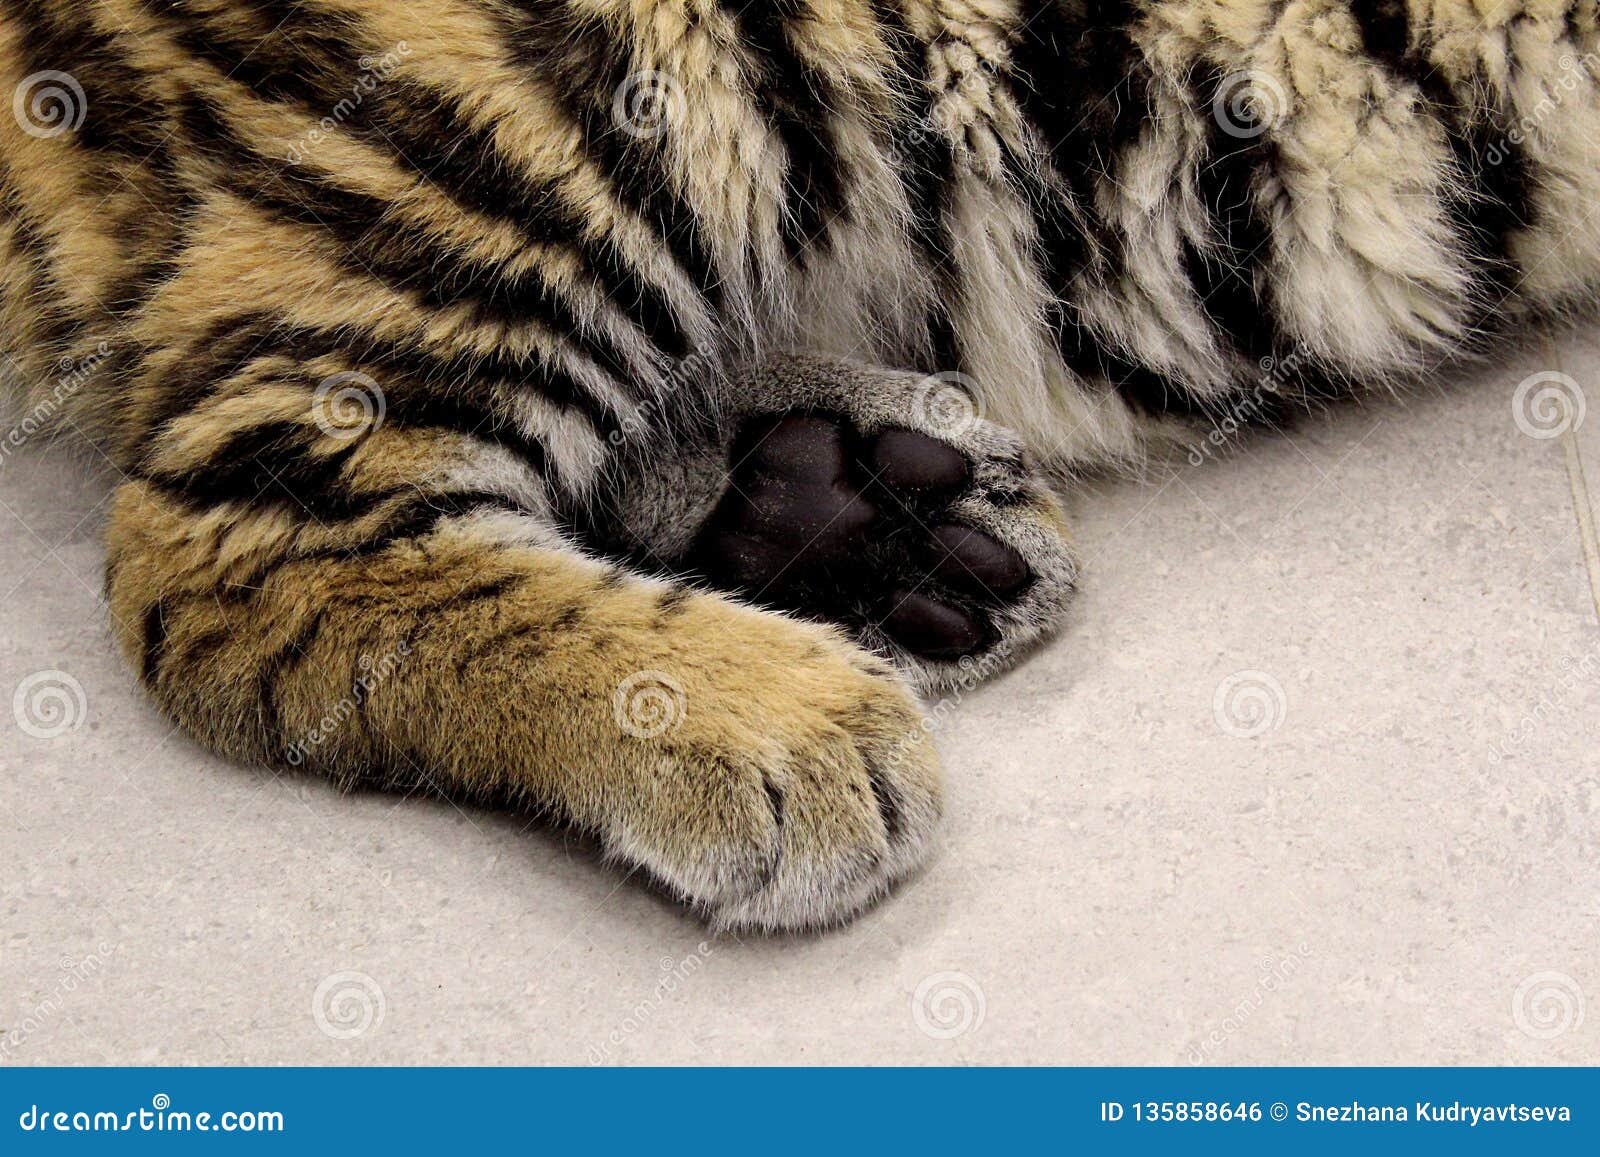 Tiger`s Strong Paws Lie on the Floor Photo - Image feline, striped: